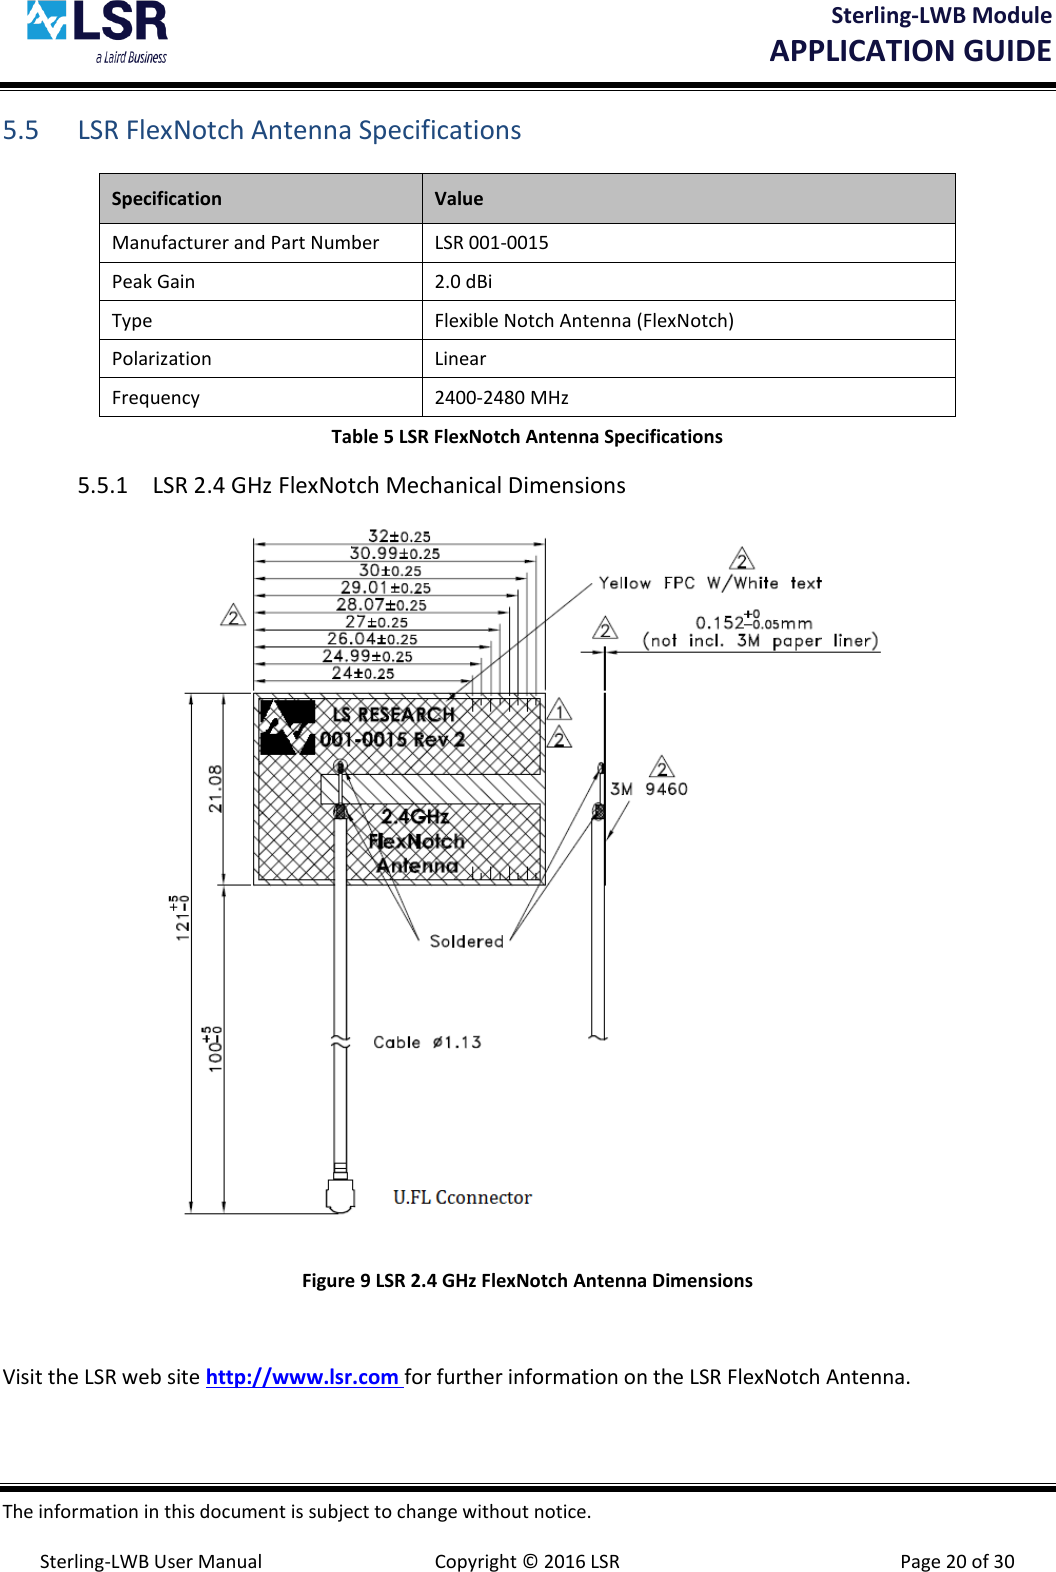 Sterling-LWB Module       APPLICATION GUIDE  The information in this document is subject to change without notice.  Sterling-LWB User Manual  Copyright © 2016 LSR  Page 20 of 30 5.5 LSR FlexNotch Antenna Specifications Specification Value Manufacturer and Part Number LSR 001-0015 Peak Gain  2.0 dBi Type Flexible Notch Antenna (FlexNotch) Polarization Linear Frequency 2400-2480 MHz Table 5 LSR FlexNotch Antenna Specifications 5.5.1 LSR 2.4 GHz FlexNotch Mechanical Dimensions  Figure 9 LSR 2.4 GHz FlexNotch Antenna Dimensions  Visit the LSR web site http://www.lsr.com for further information on the LSR FlexNotch Antenna. 